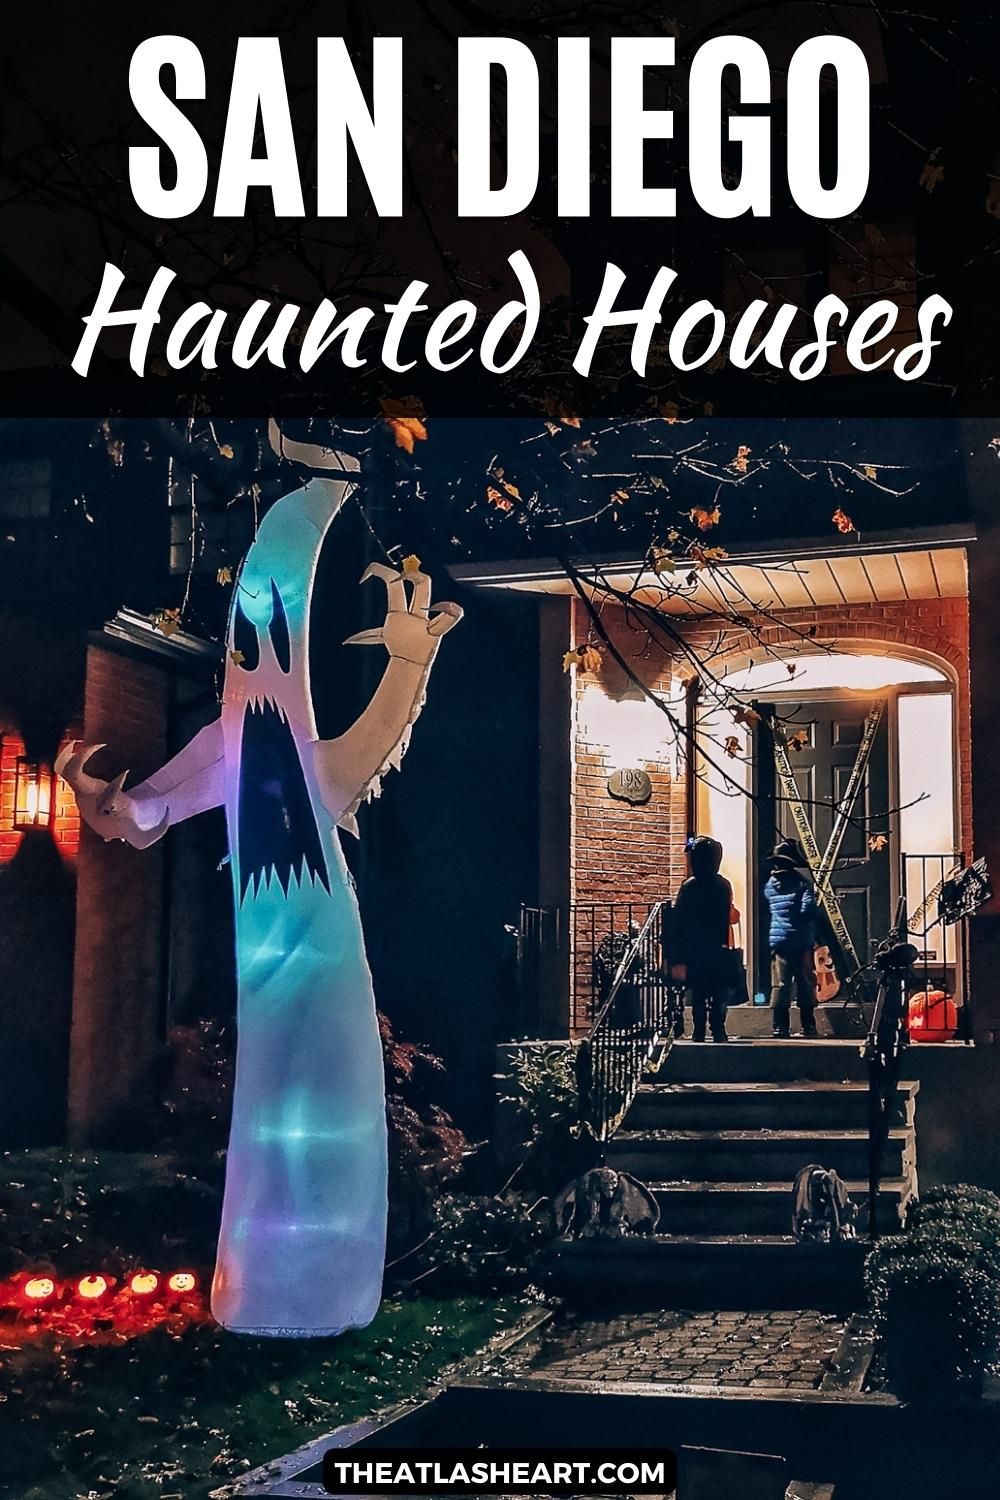 Two children knocking on the door of a house decorated heavily for Halloween at night time, with the text overlay, "San Diego Haunted Houses."